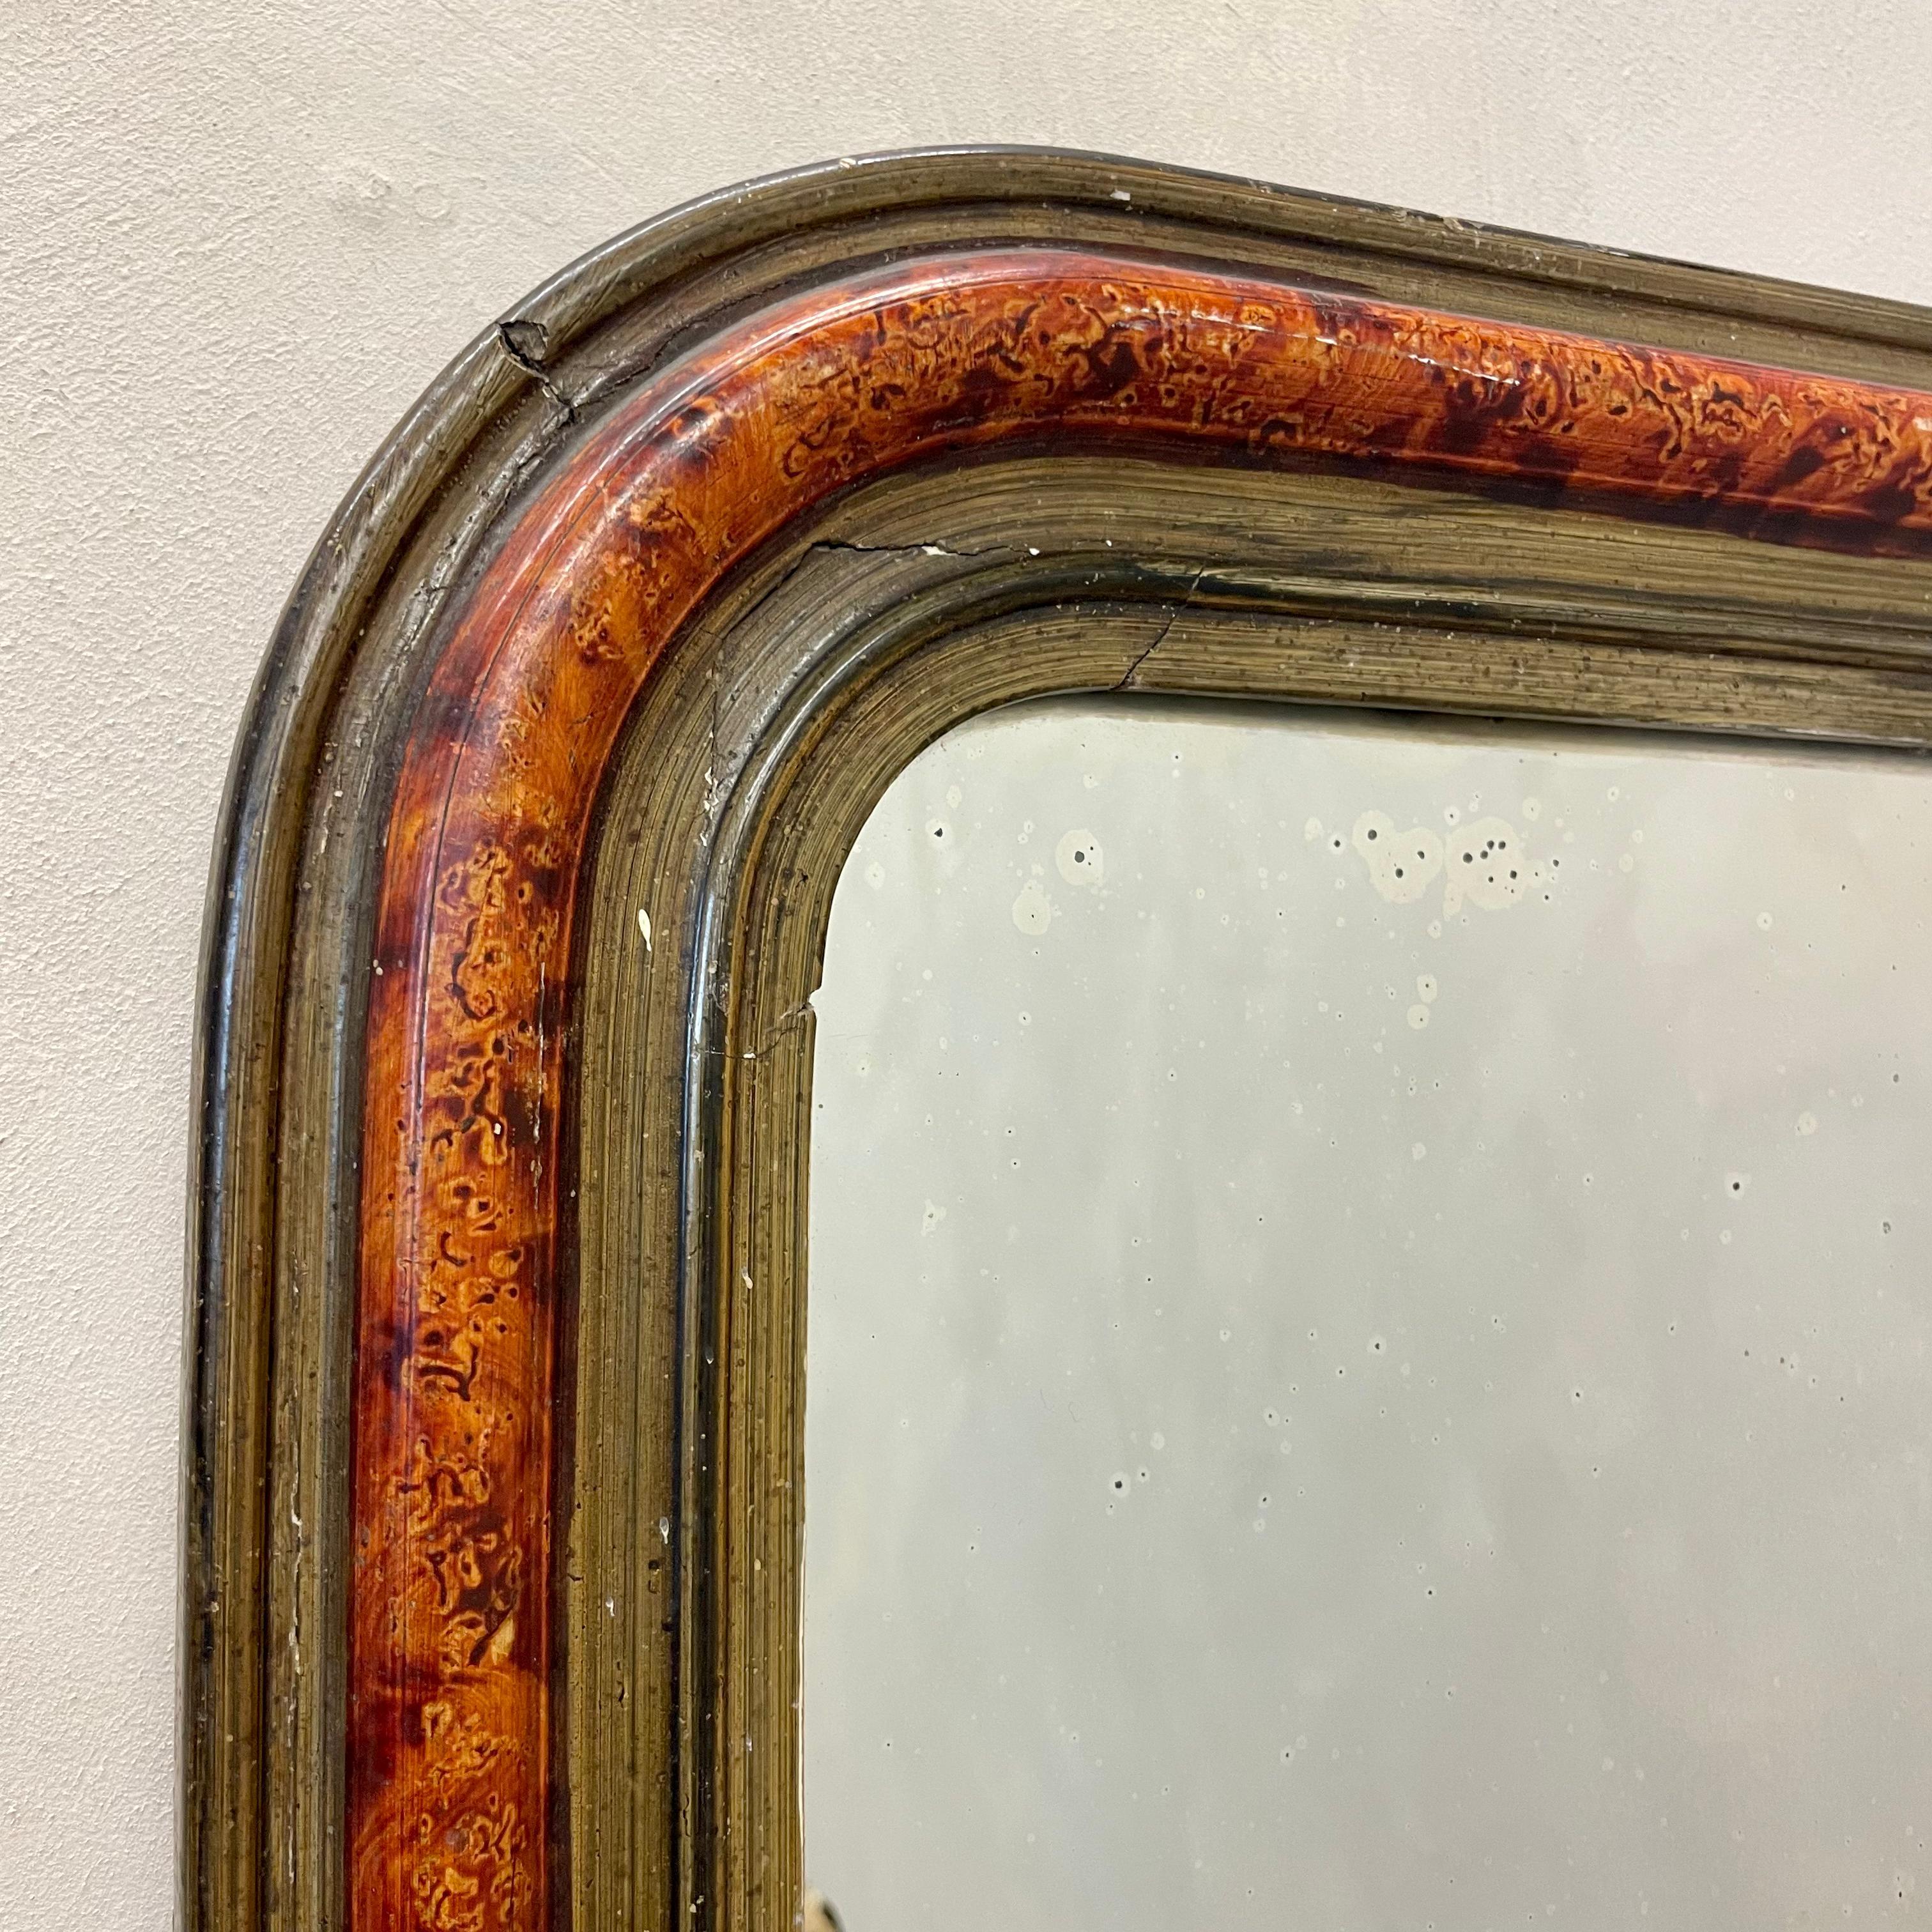 French 19th C Louis Philippe mirror.
Hand painted faux marbled paint finish.

Original mirror plate.

Dimensions:W: 42cm (16.5